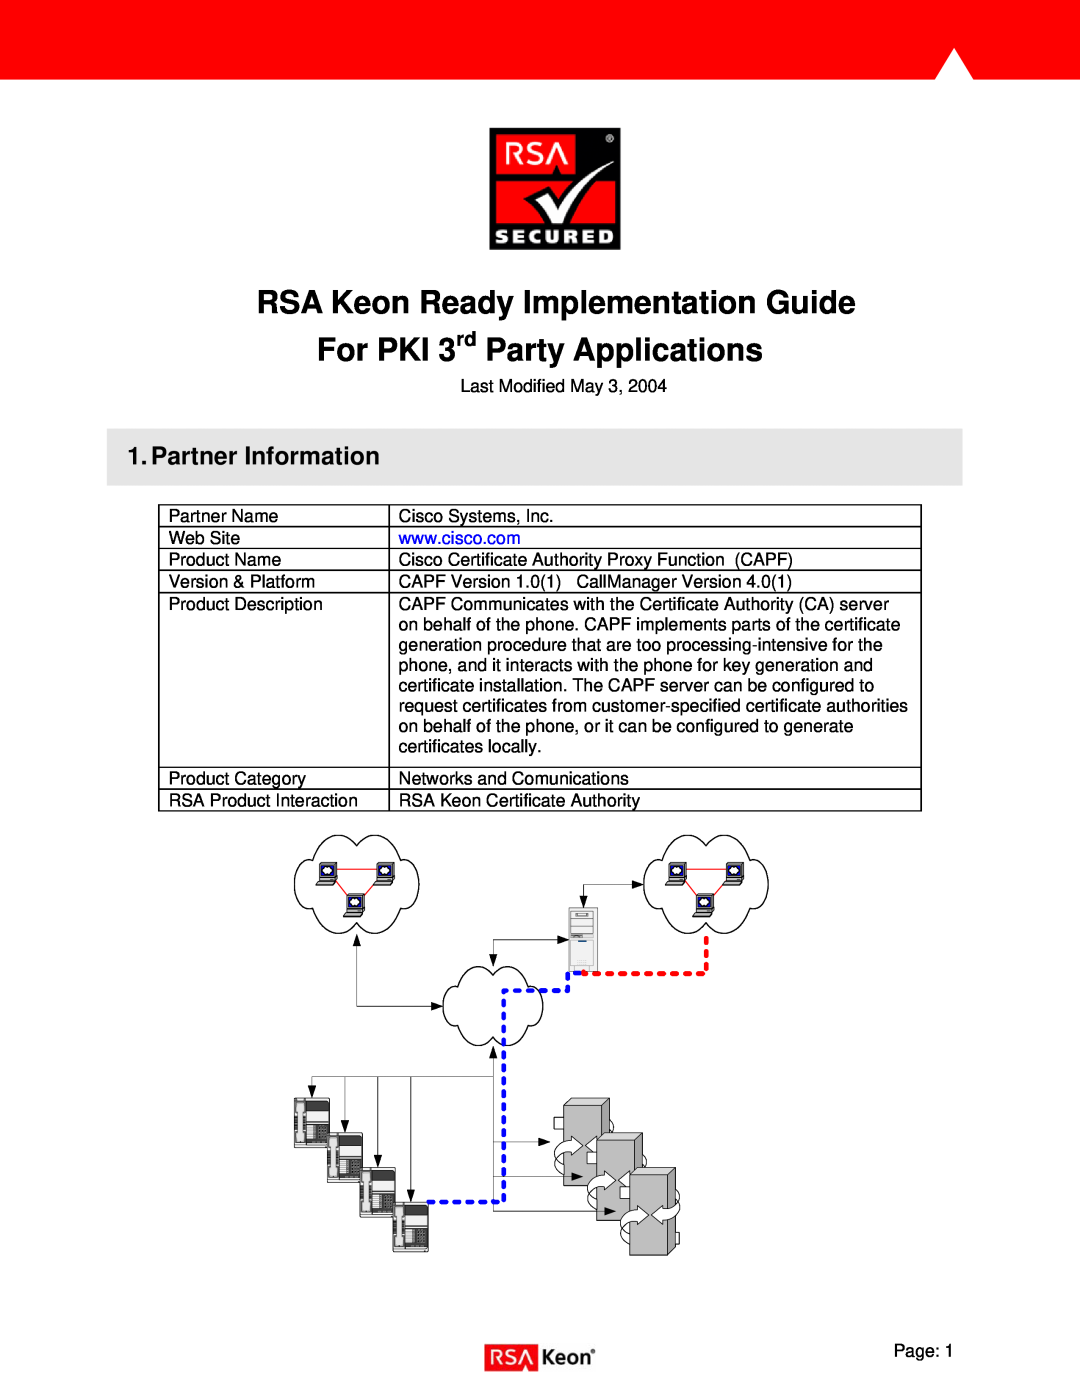 Cisco Systems not available manual RSA Keon Ready Implementation Guide For PKI 3rd Party Applications, Partner Information 